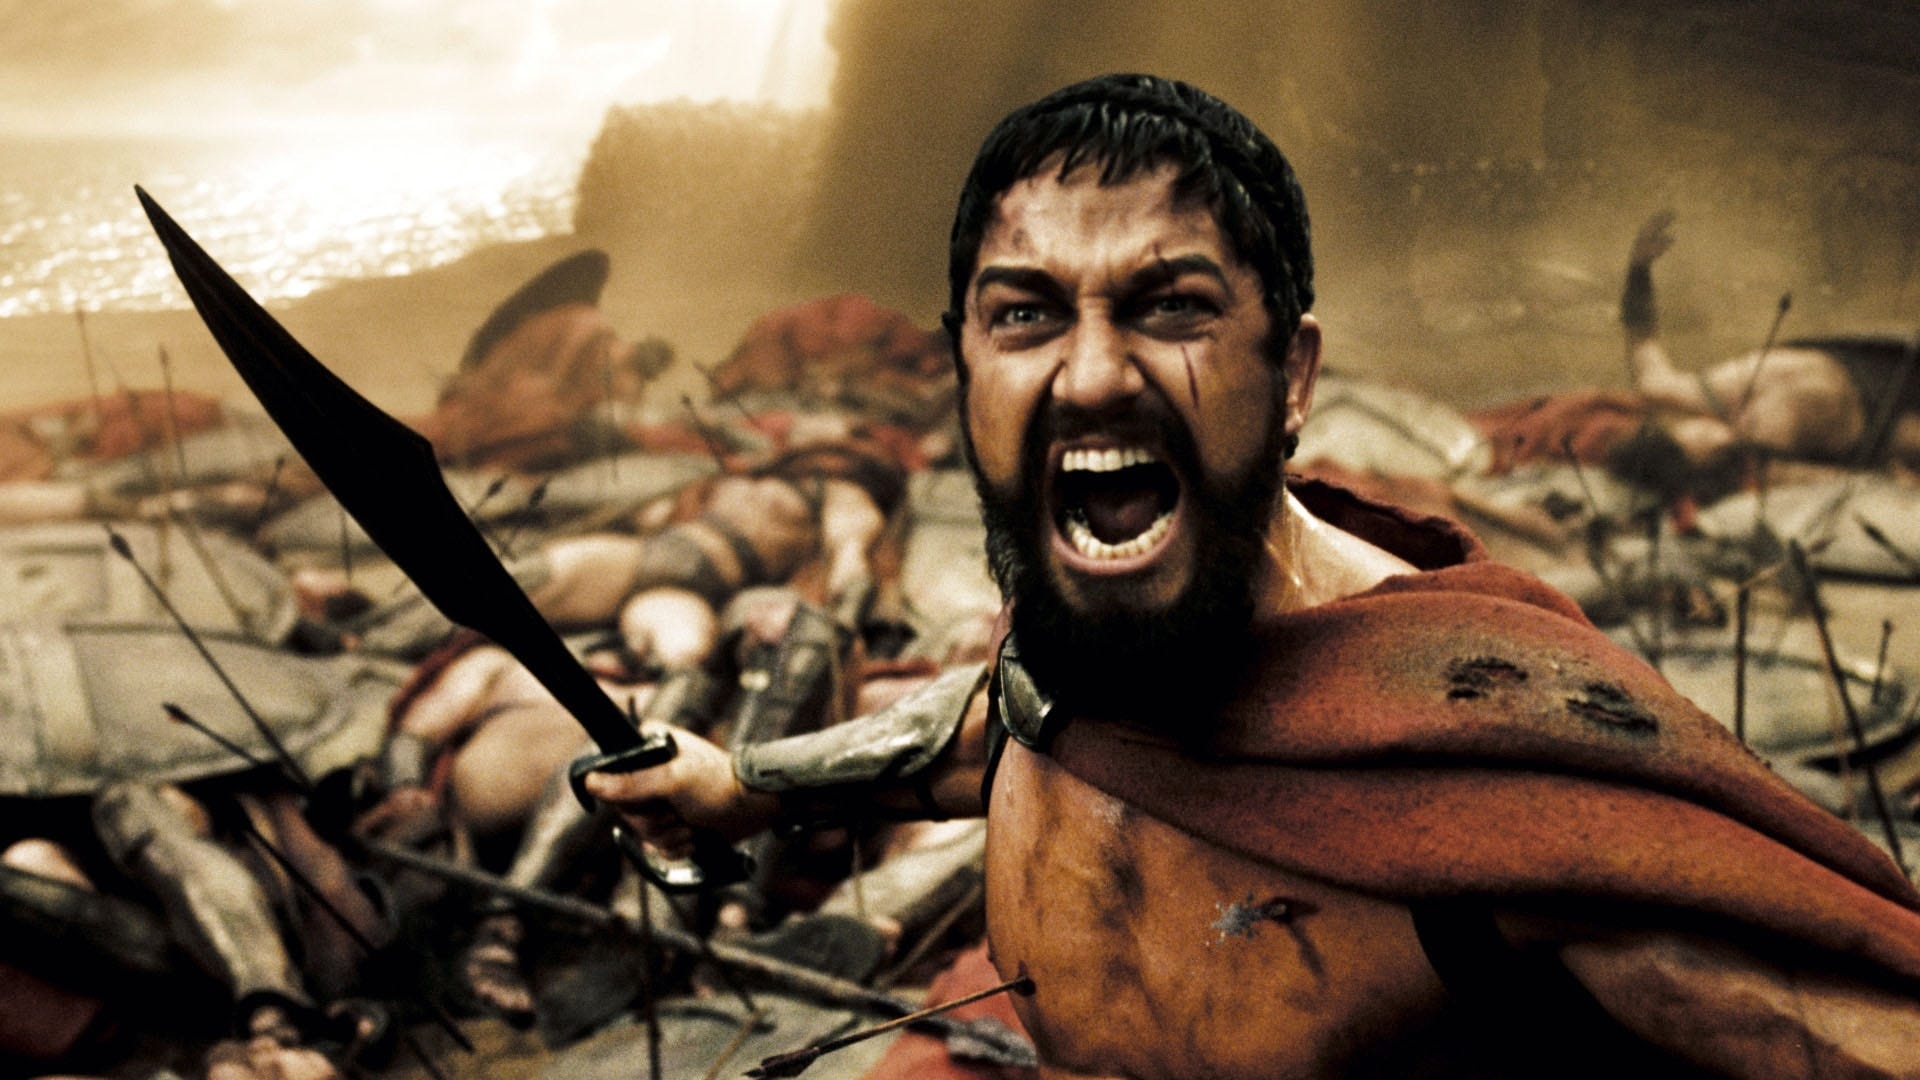 ICYMI: This Is (Not) Sparta